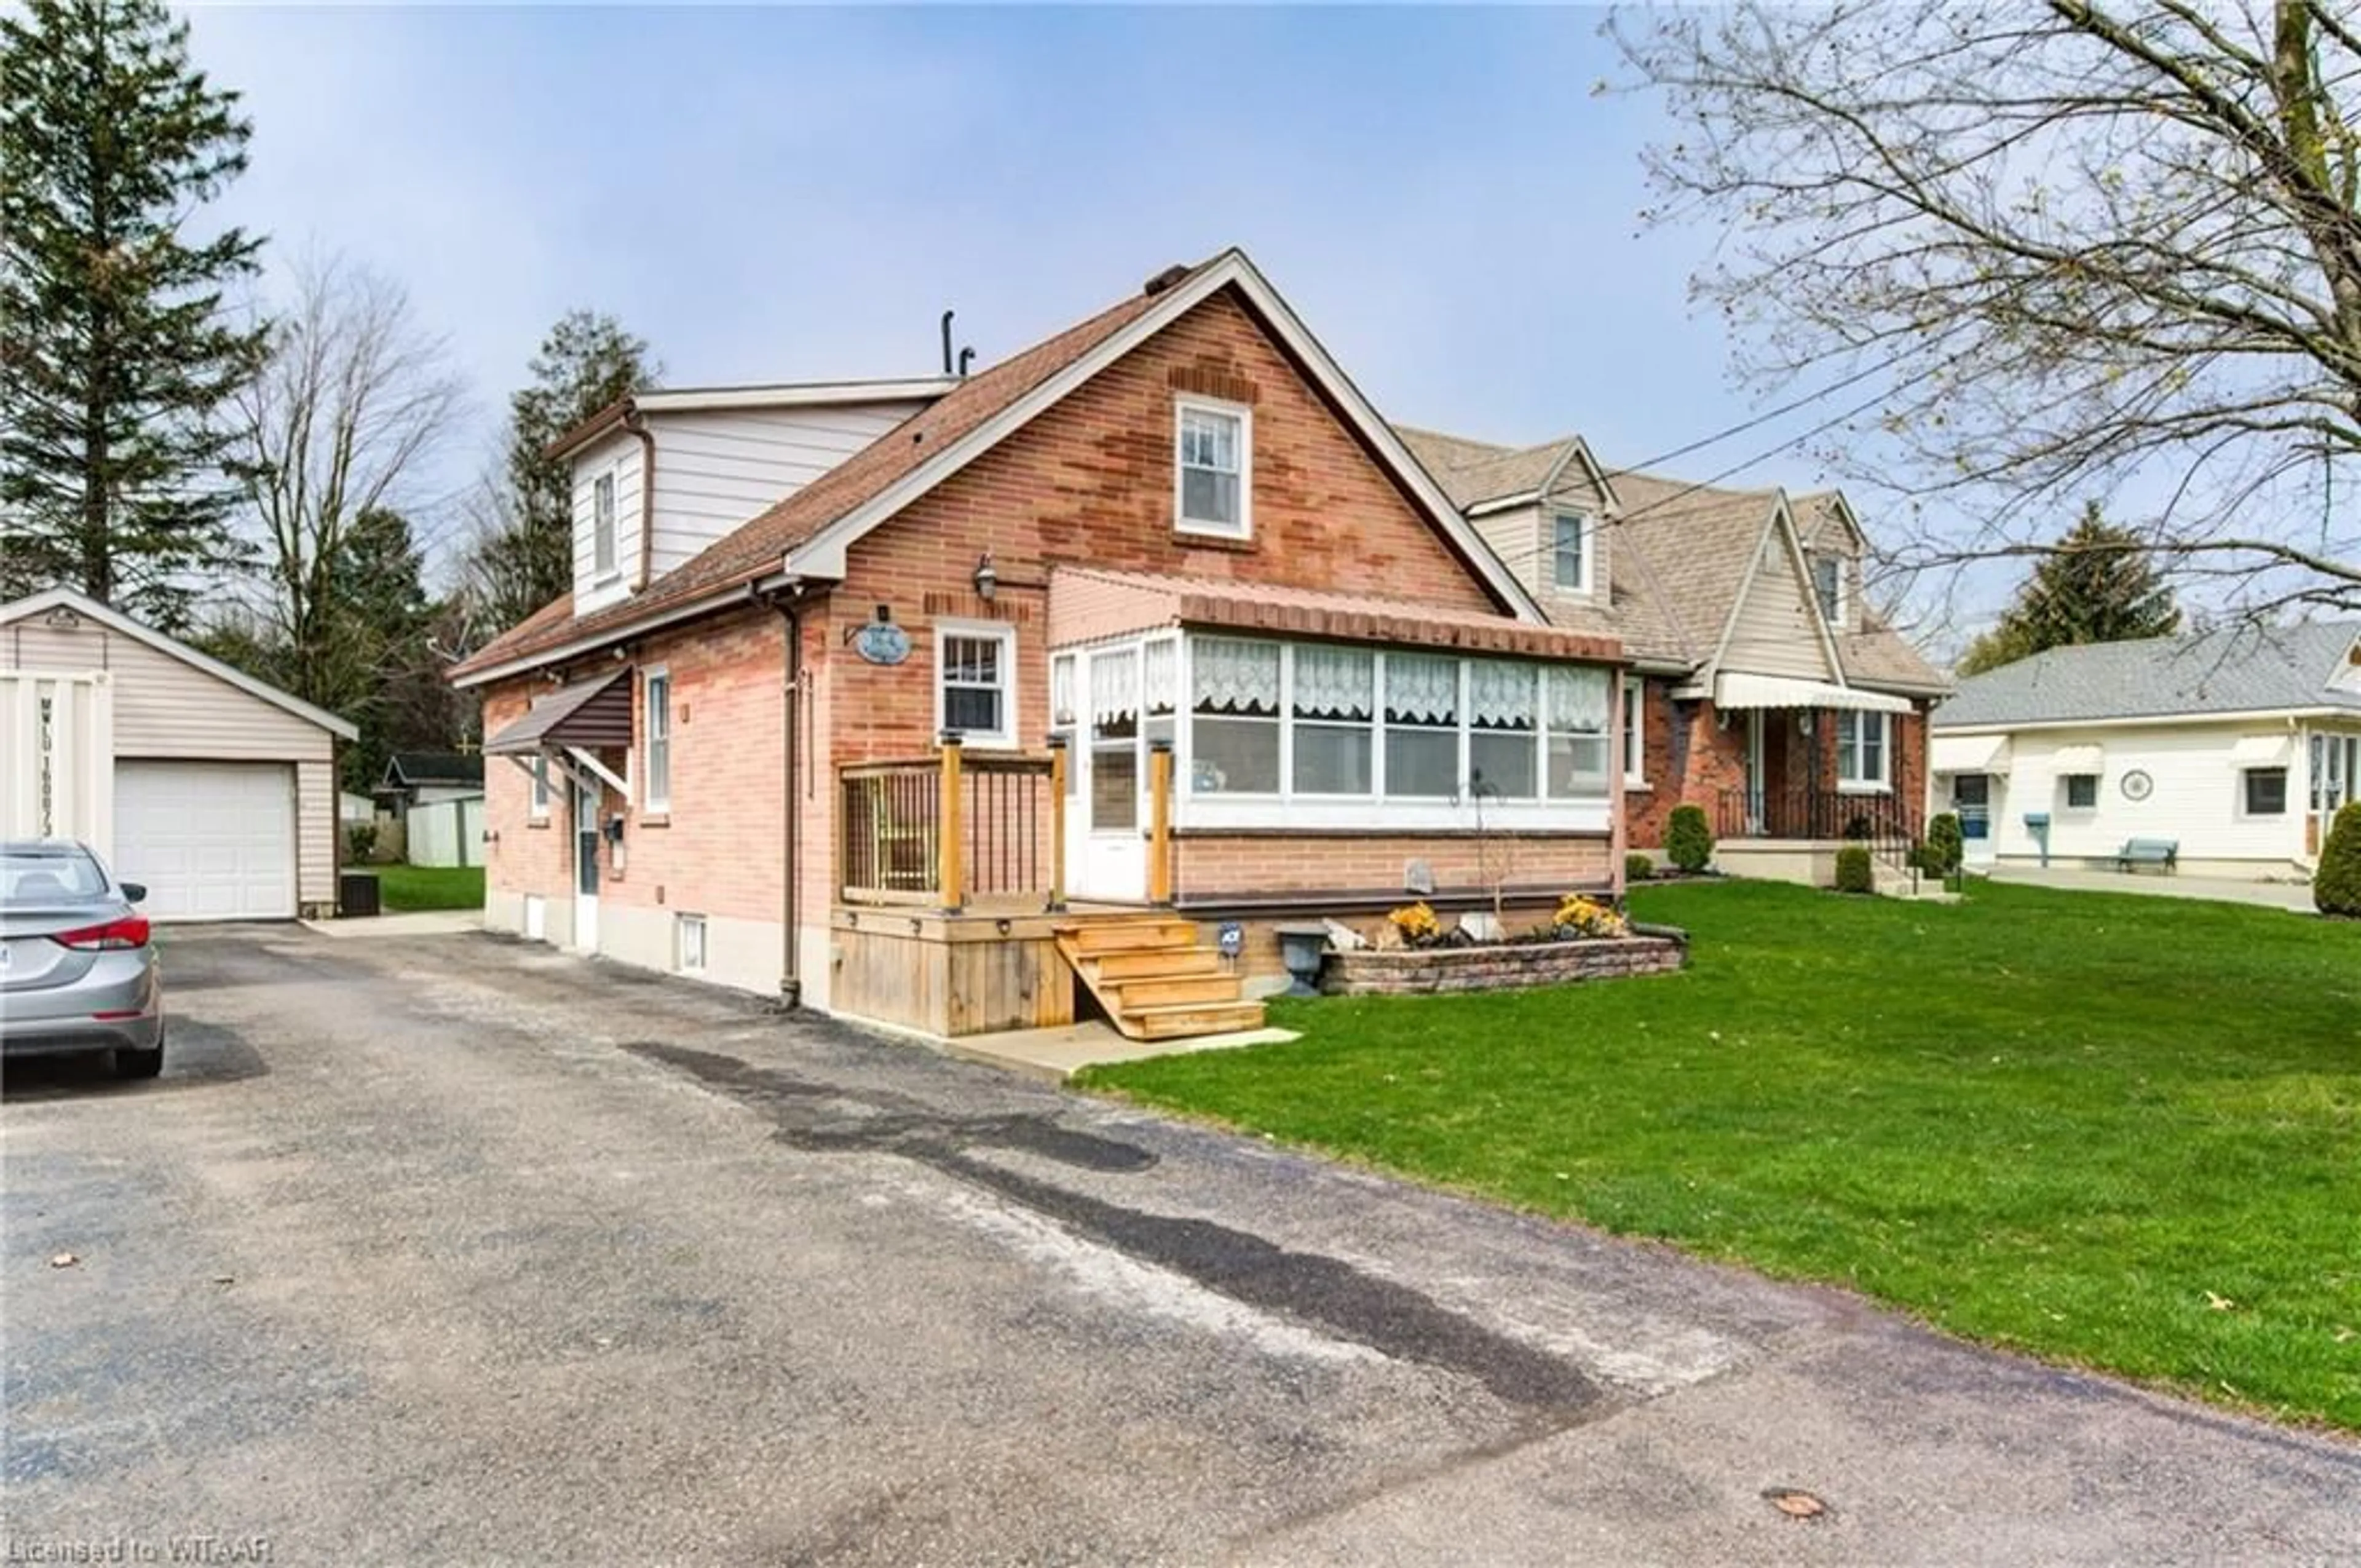 Frontside or backside of a home for 164 Wilson St, Woodstock Ontario N4S 3P4